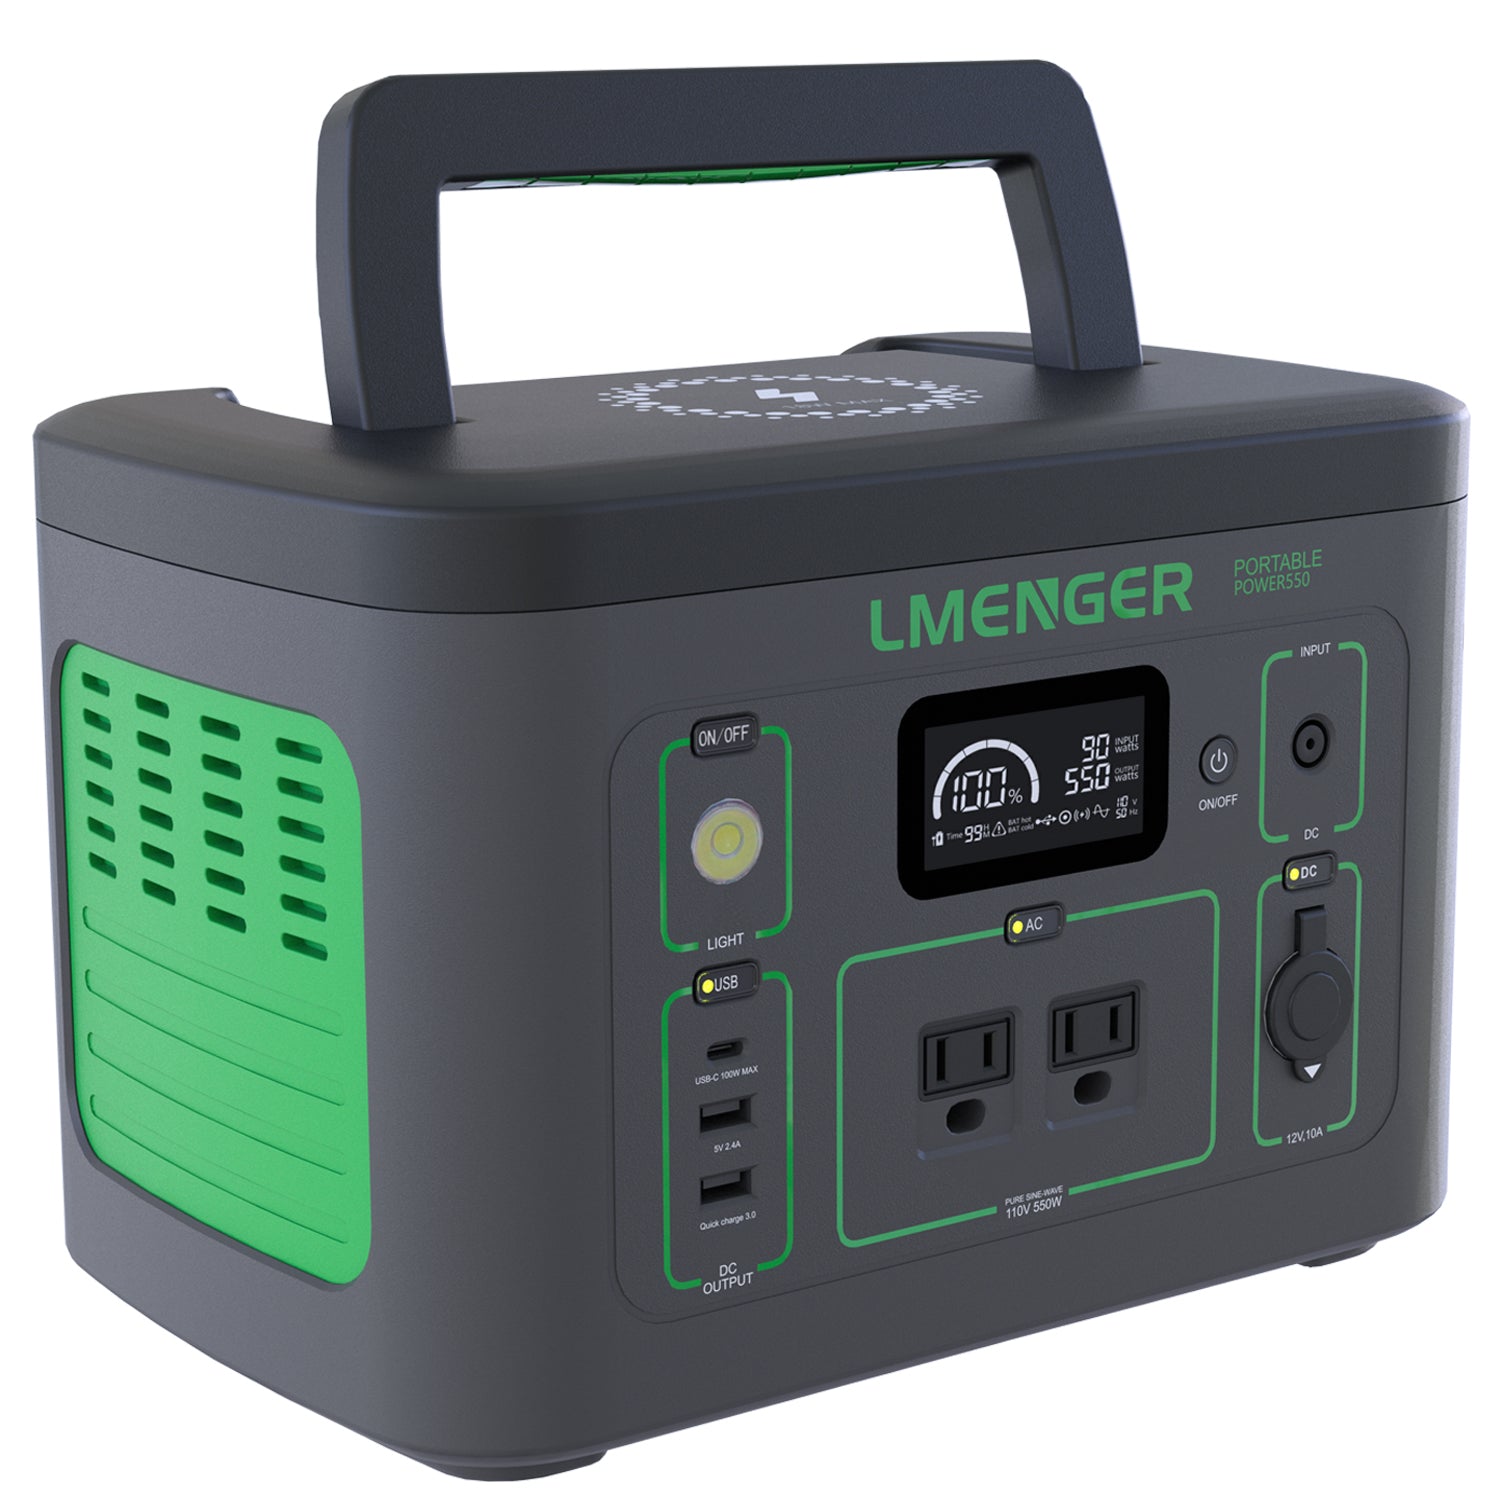 LMENGER X5 Pro Portable Power Station 550W/577Wh with Wireless Charge on Top